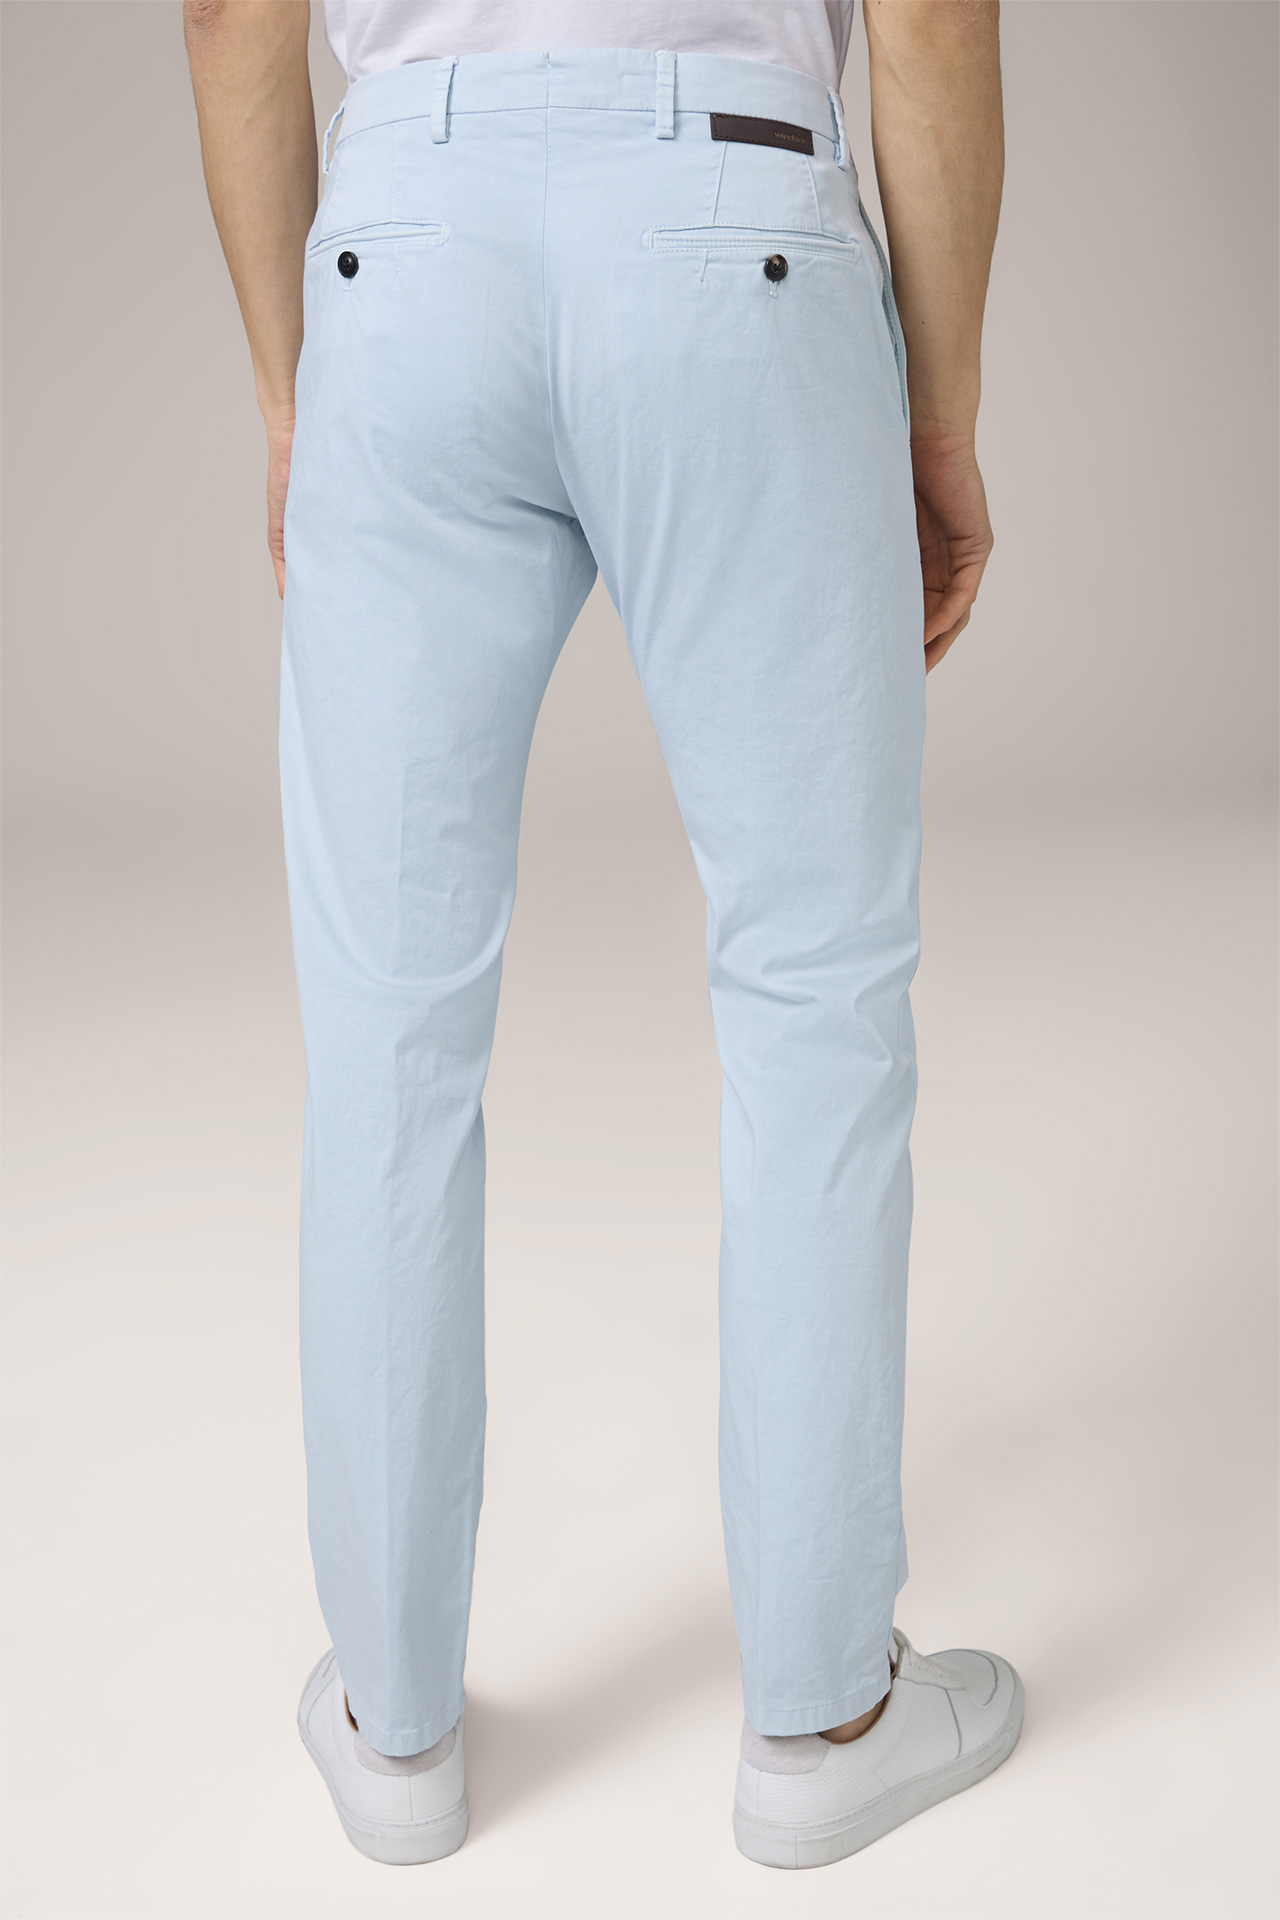 Cotton Cino Chinos in Light Blue